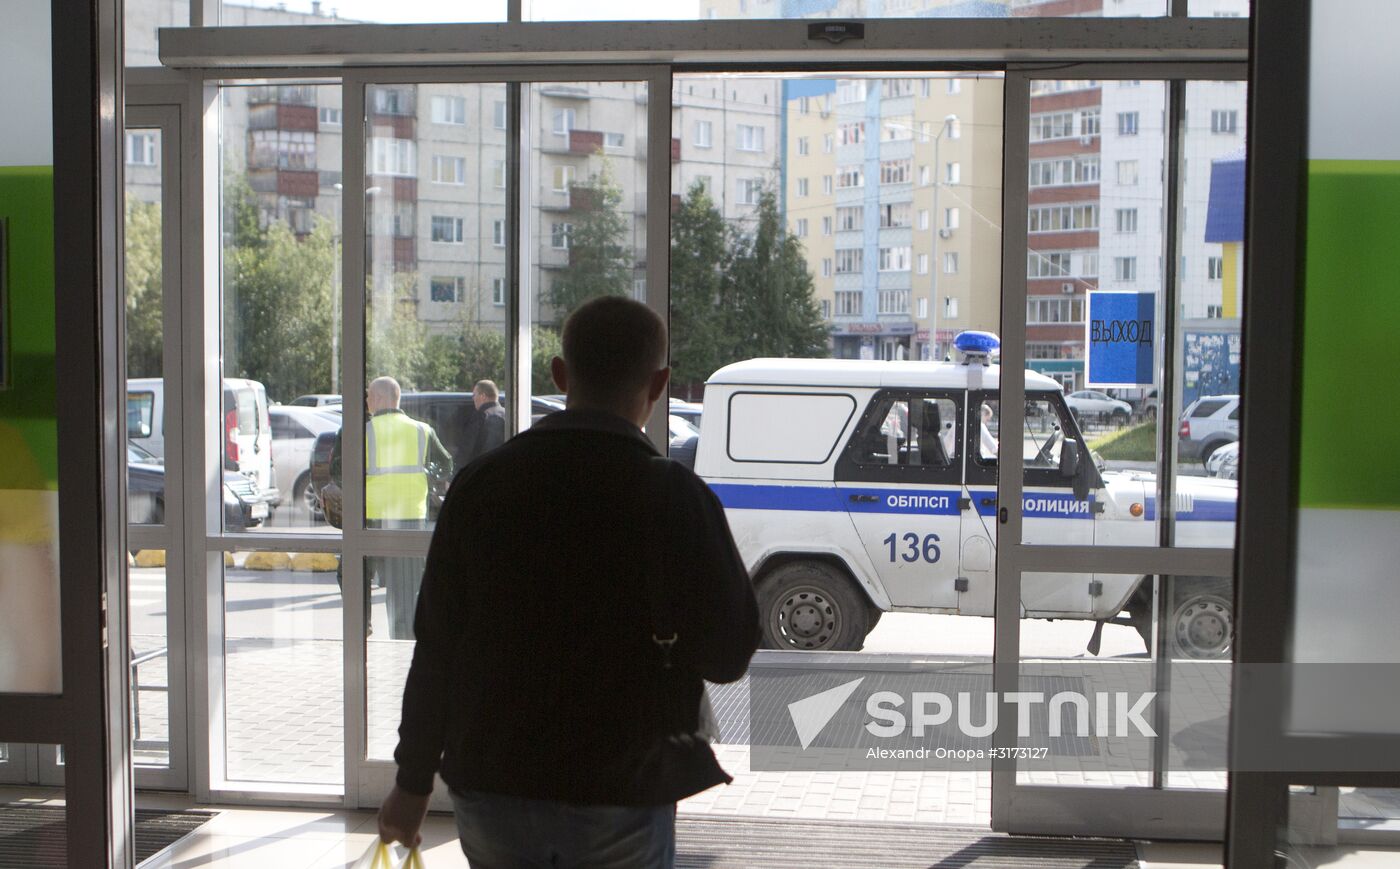 Passers-by assaulted in Surgut